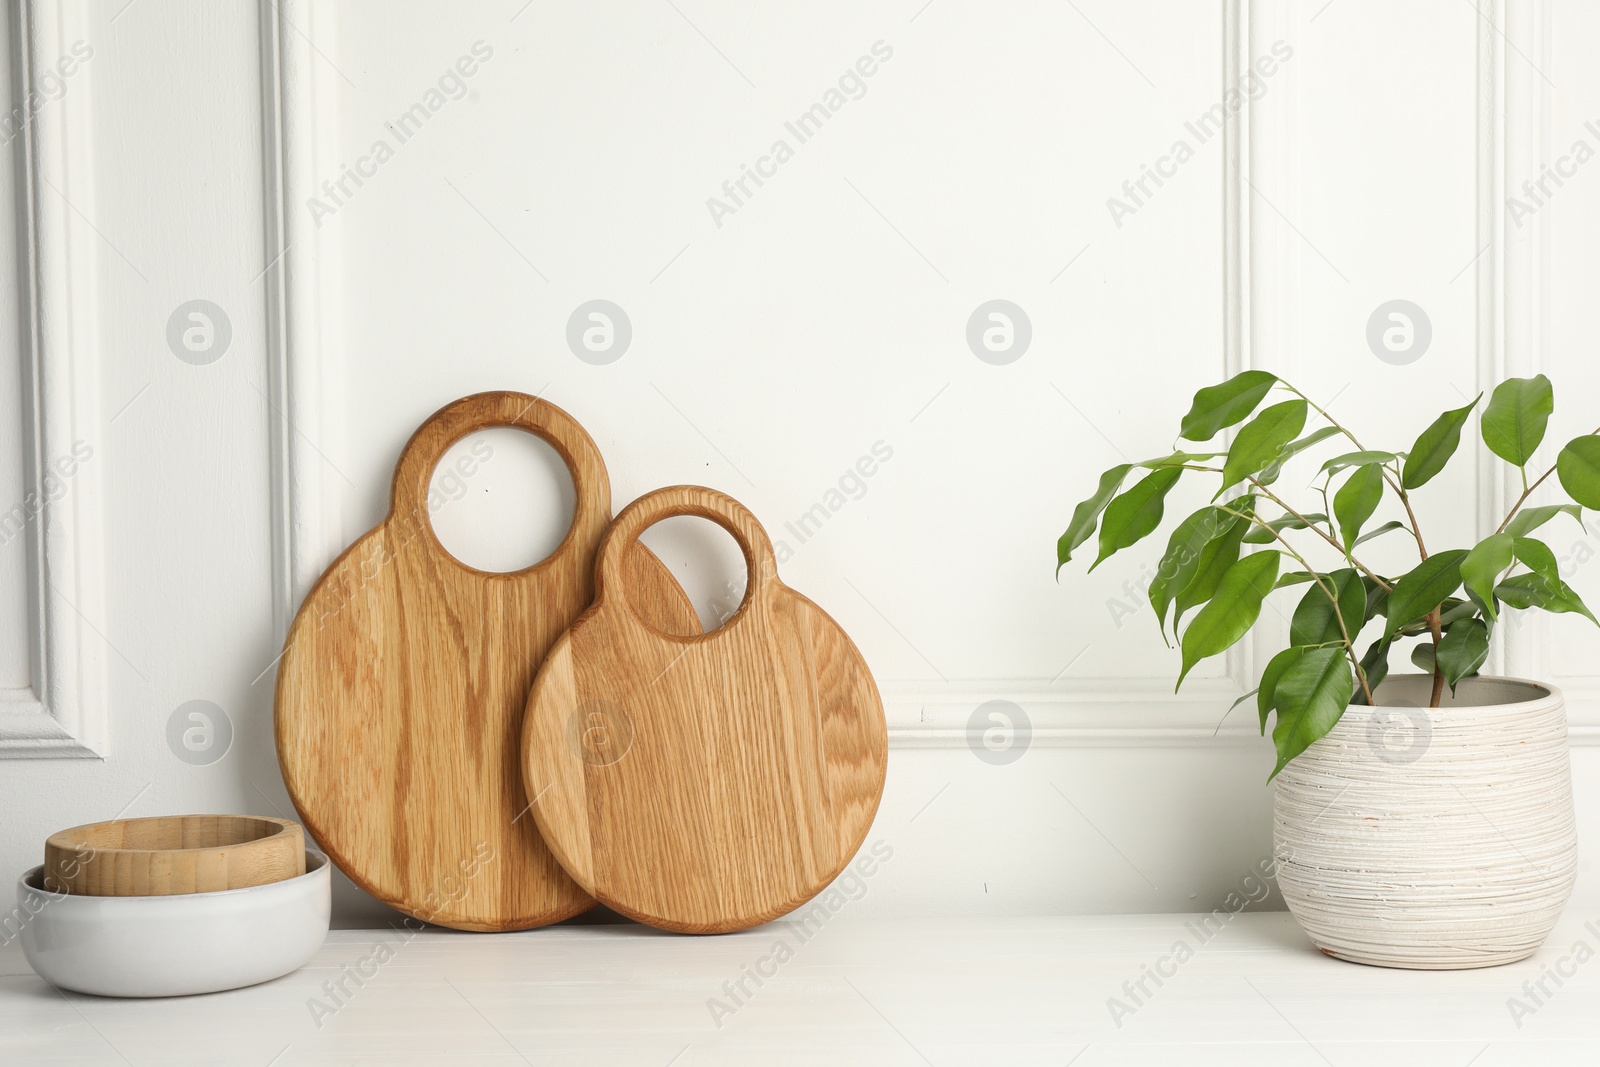 Photo of Wooden cutting boards, bowls and houseplant on white table